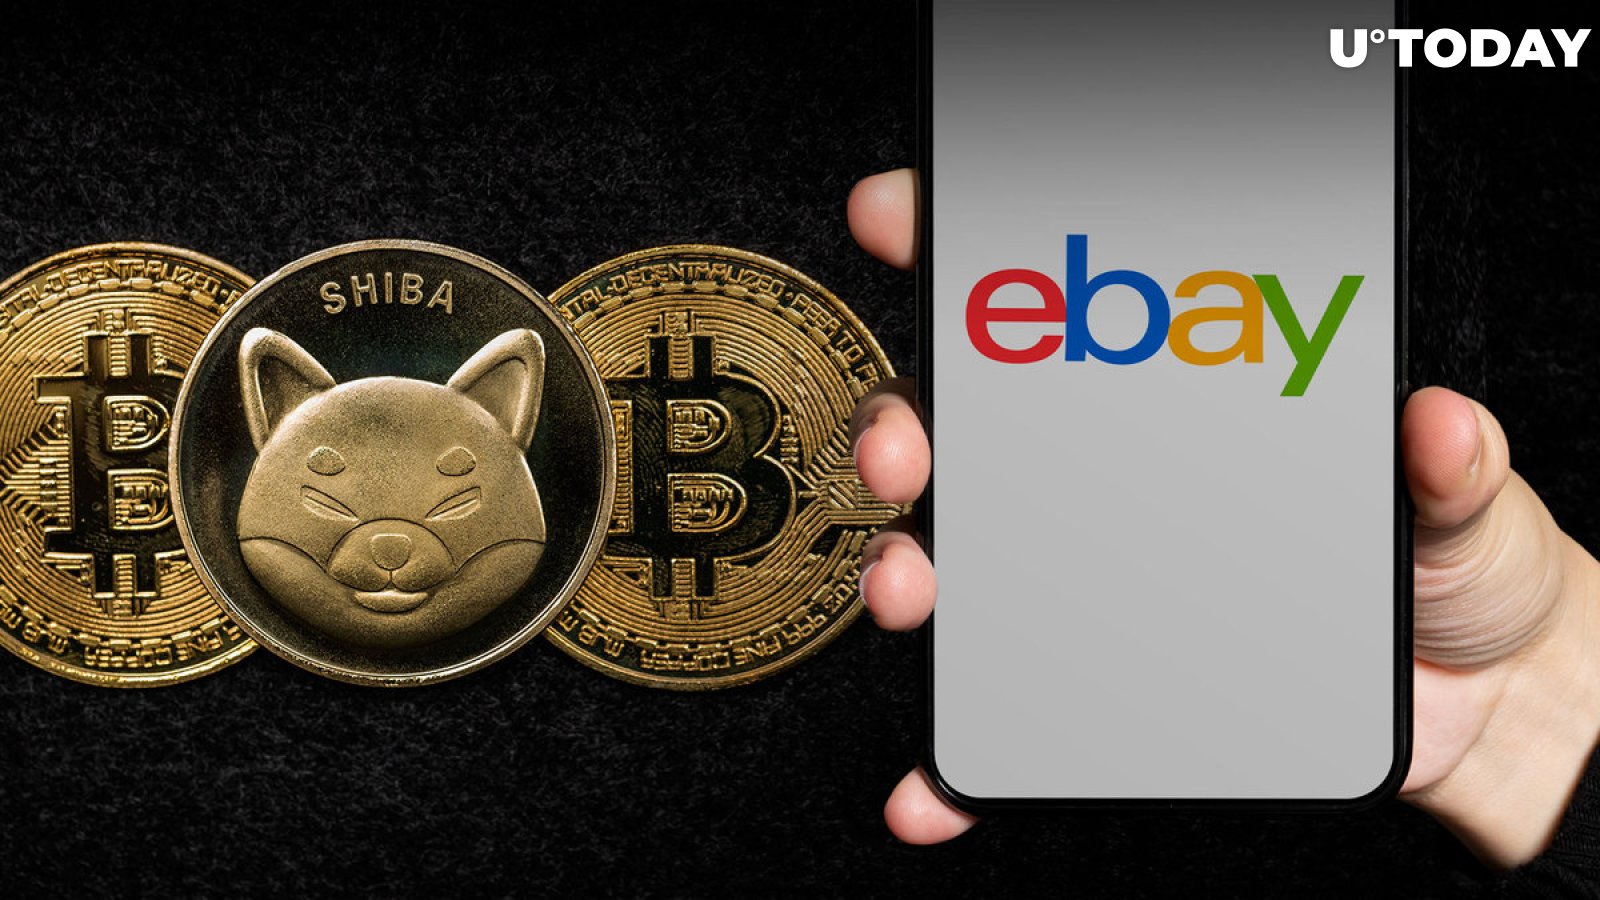 SHIB, BTC Can Now Be Spent on eCommerce Giant eBay Through This: Details